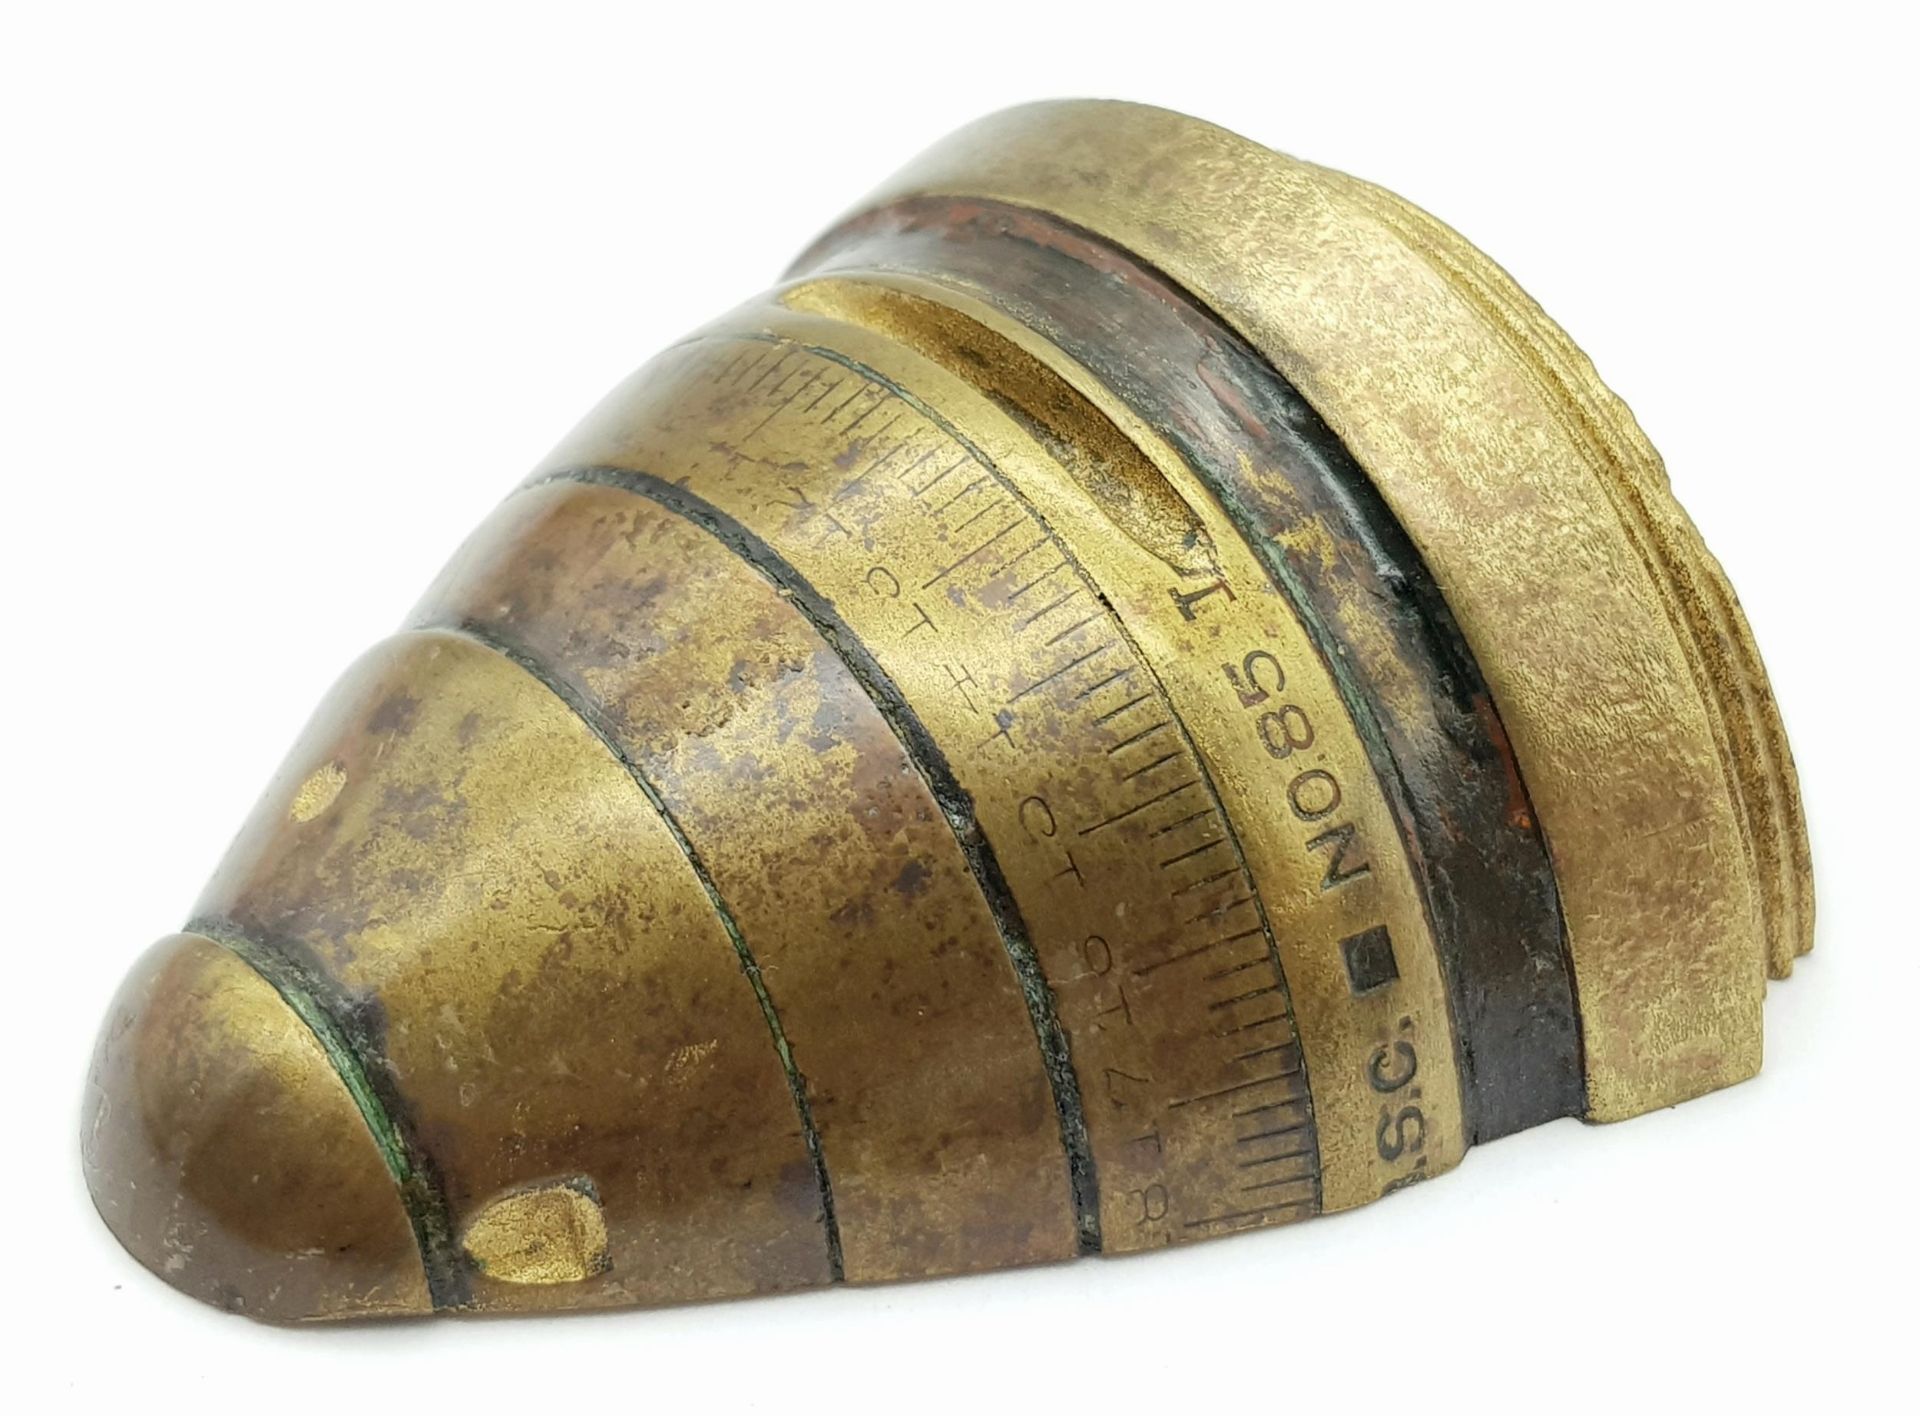 INERT British No 80 Time Fuse. Used on Shrapnel Shells so they would burst in the air, releasing a